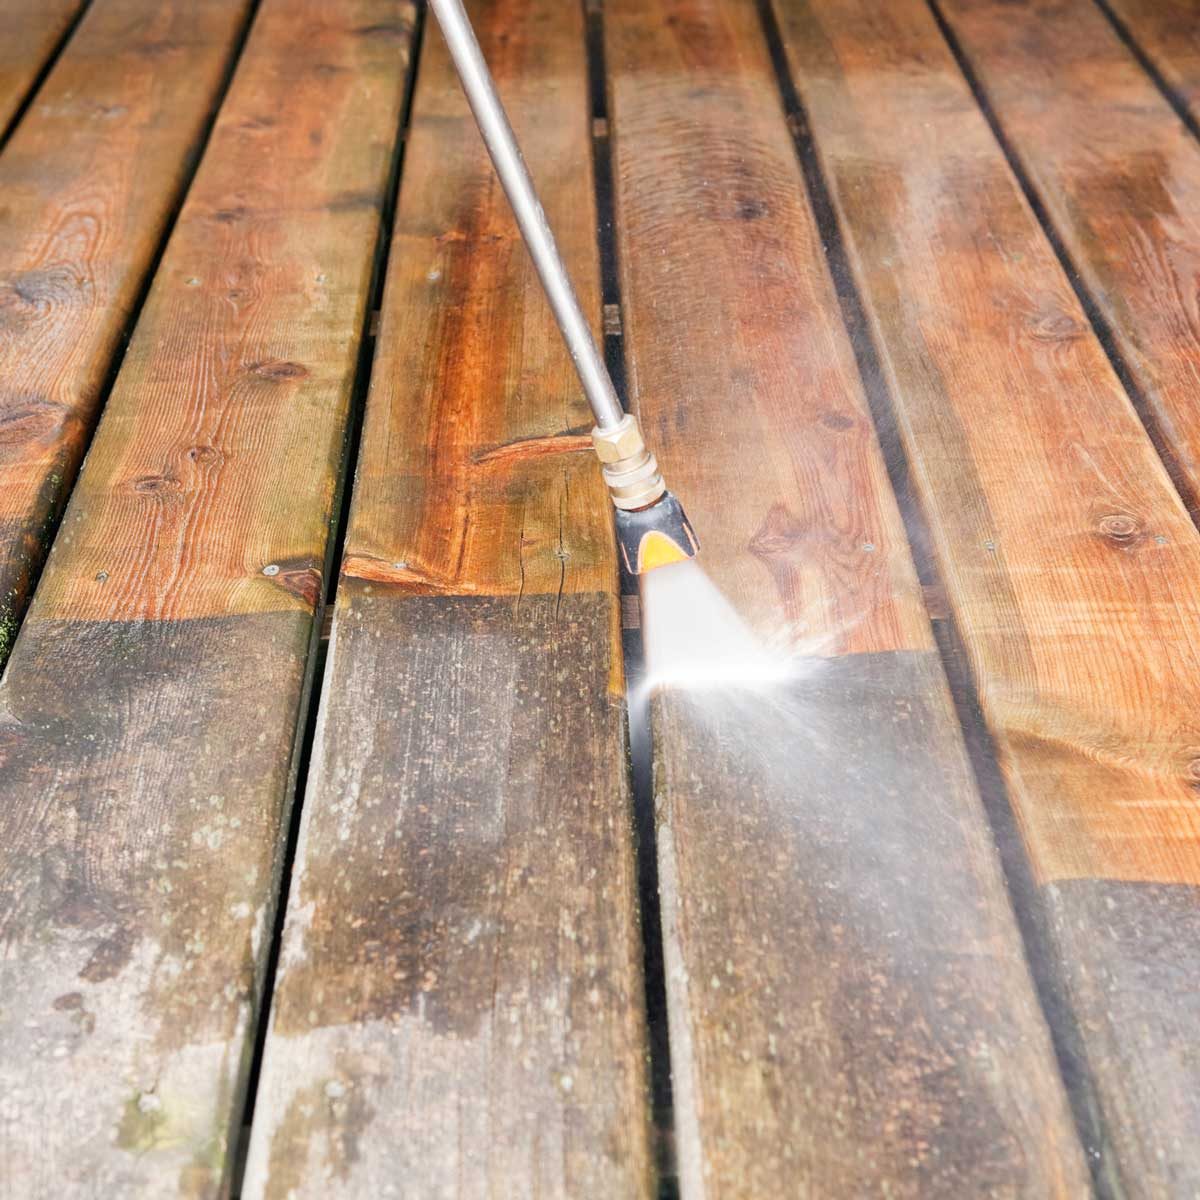 Deck Cleaning Brentwood